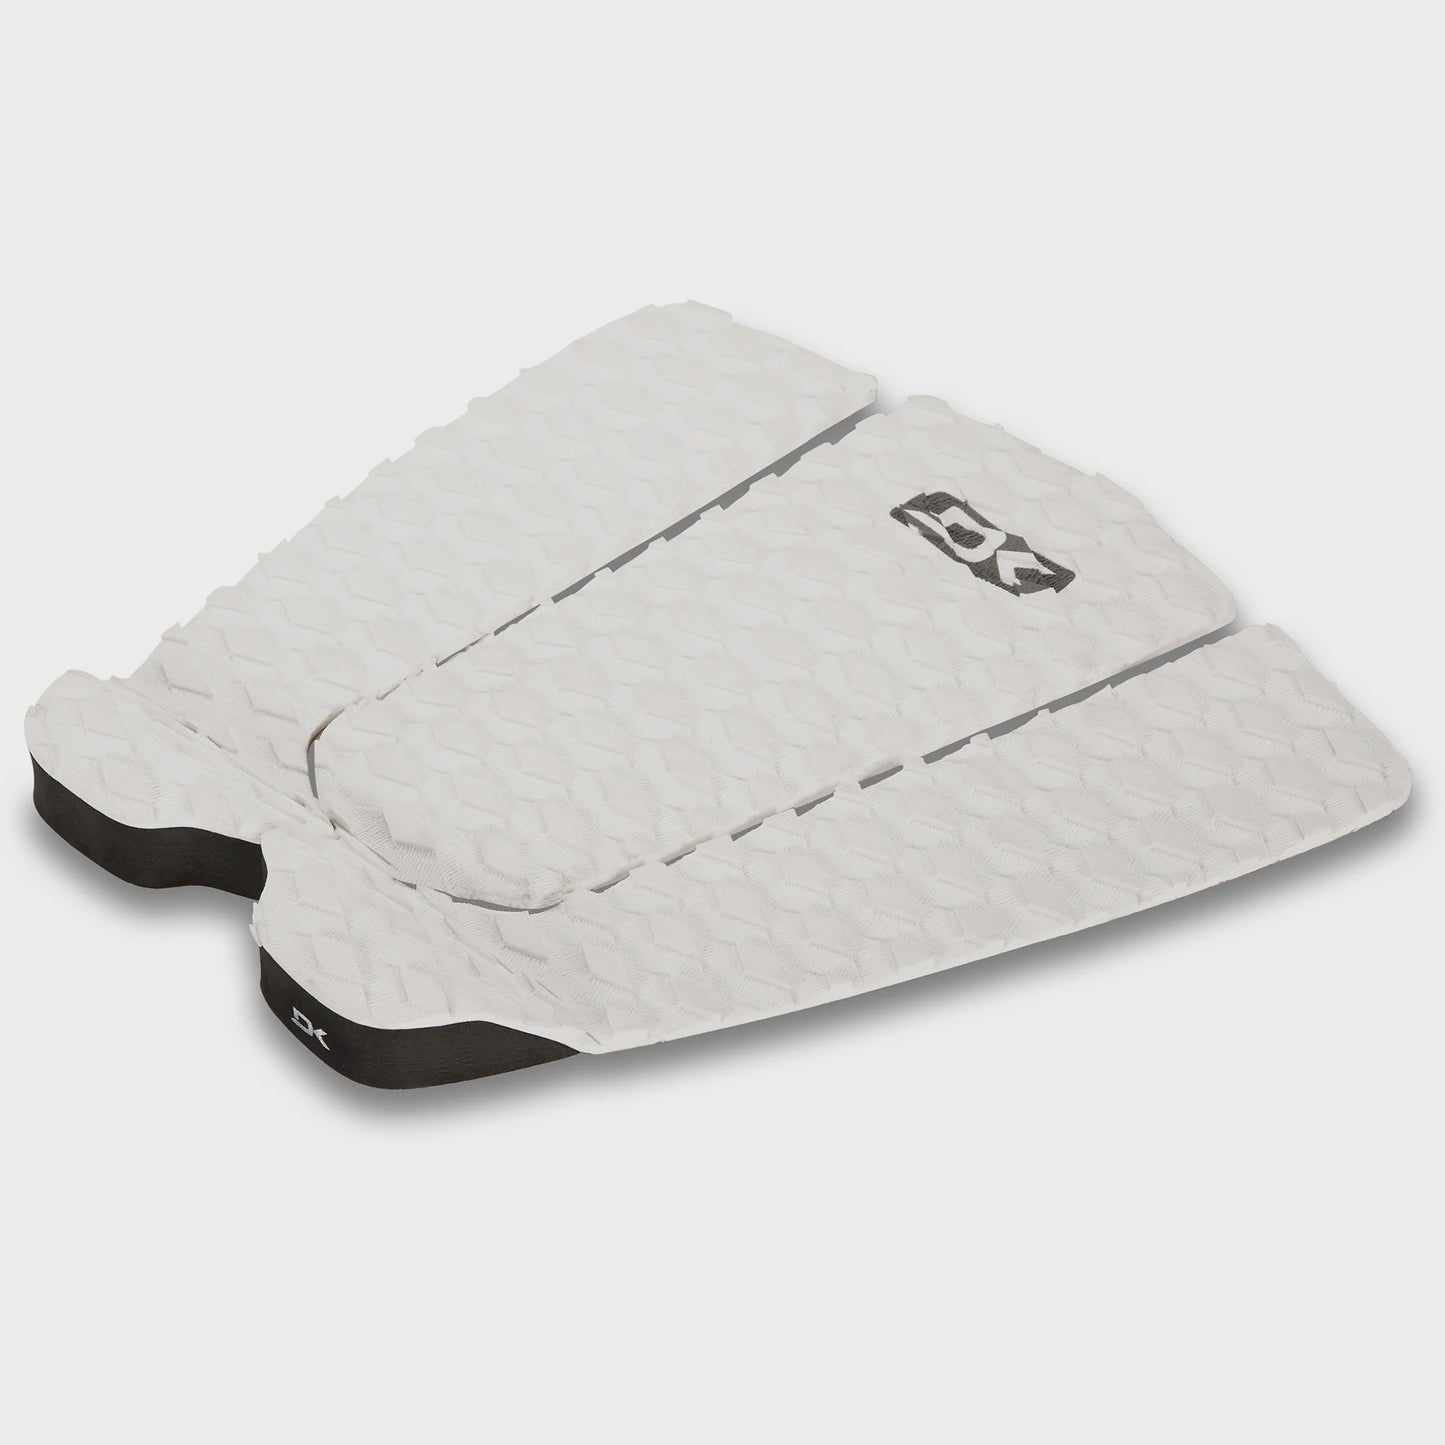 ANDY IRONS PRO SURF TRACTION PAD - WHITE